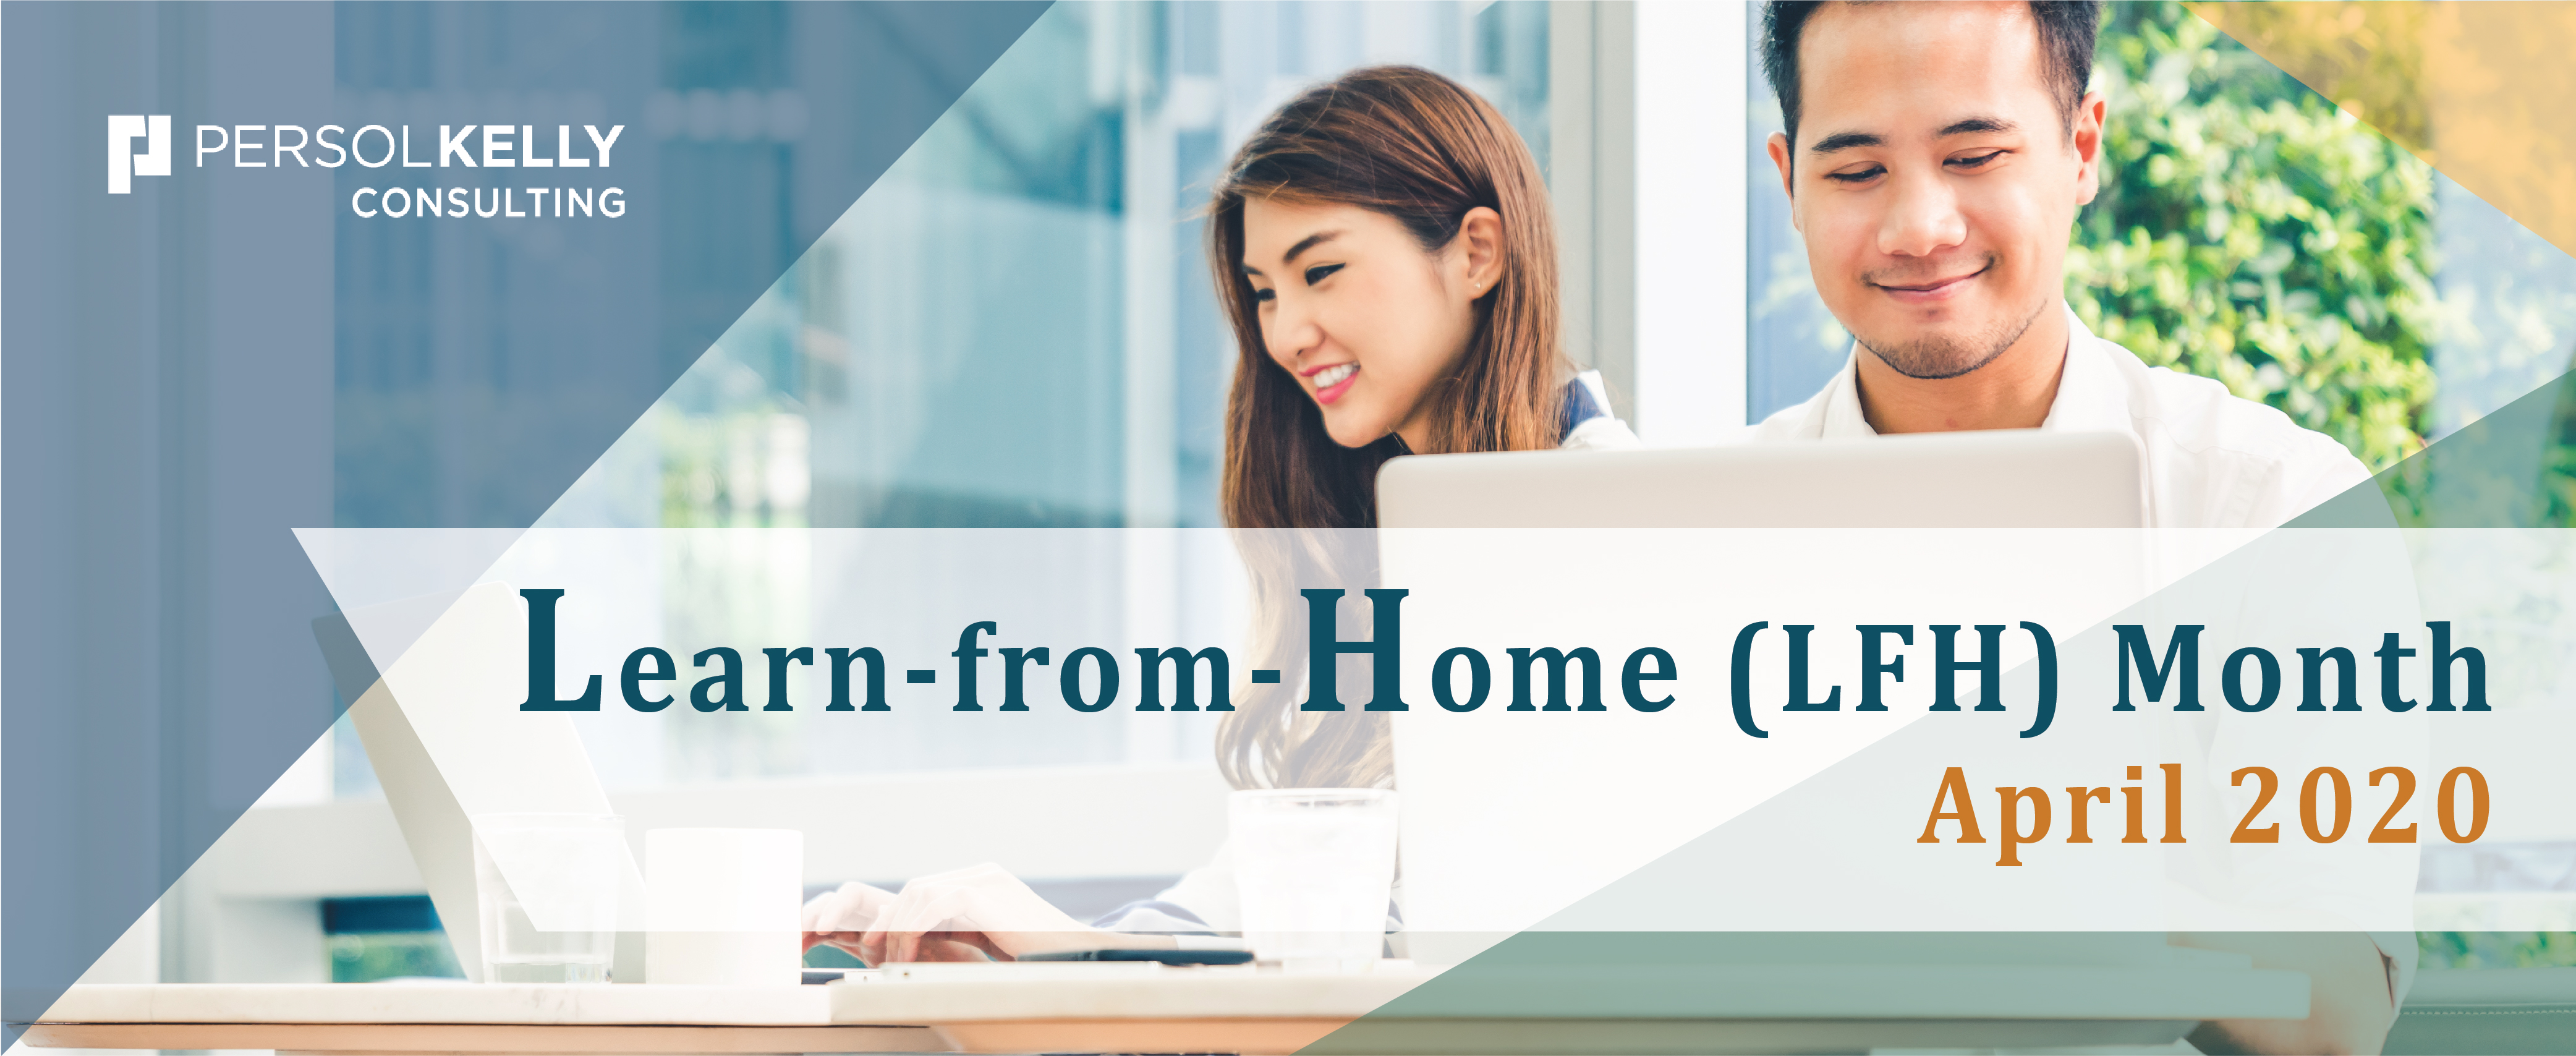 Learn –from-Home月間 